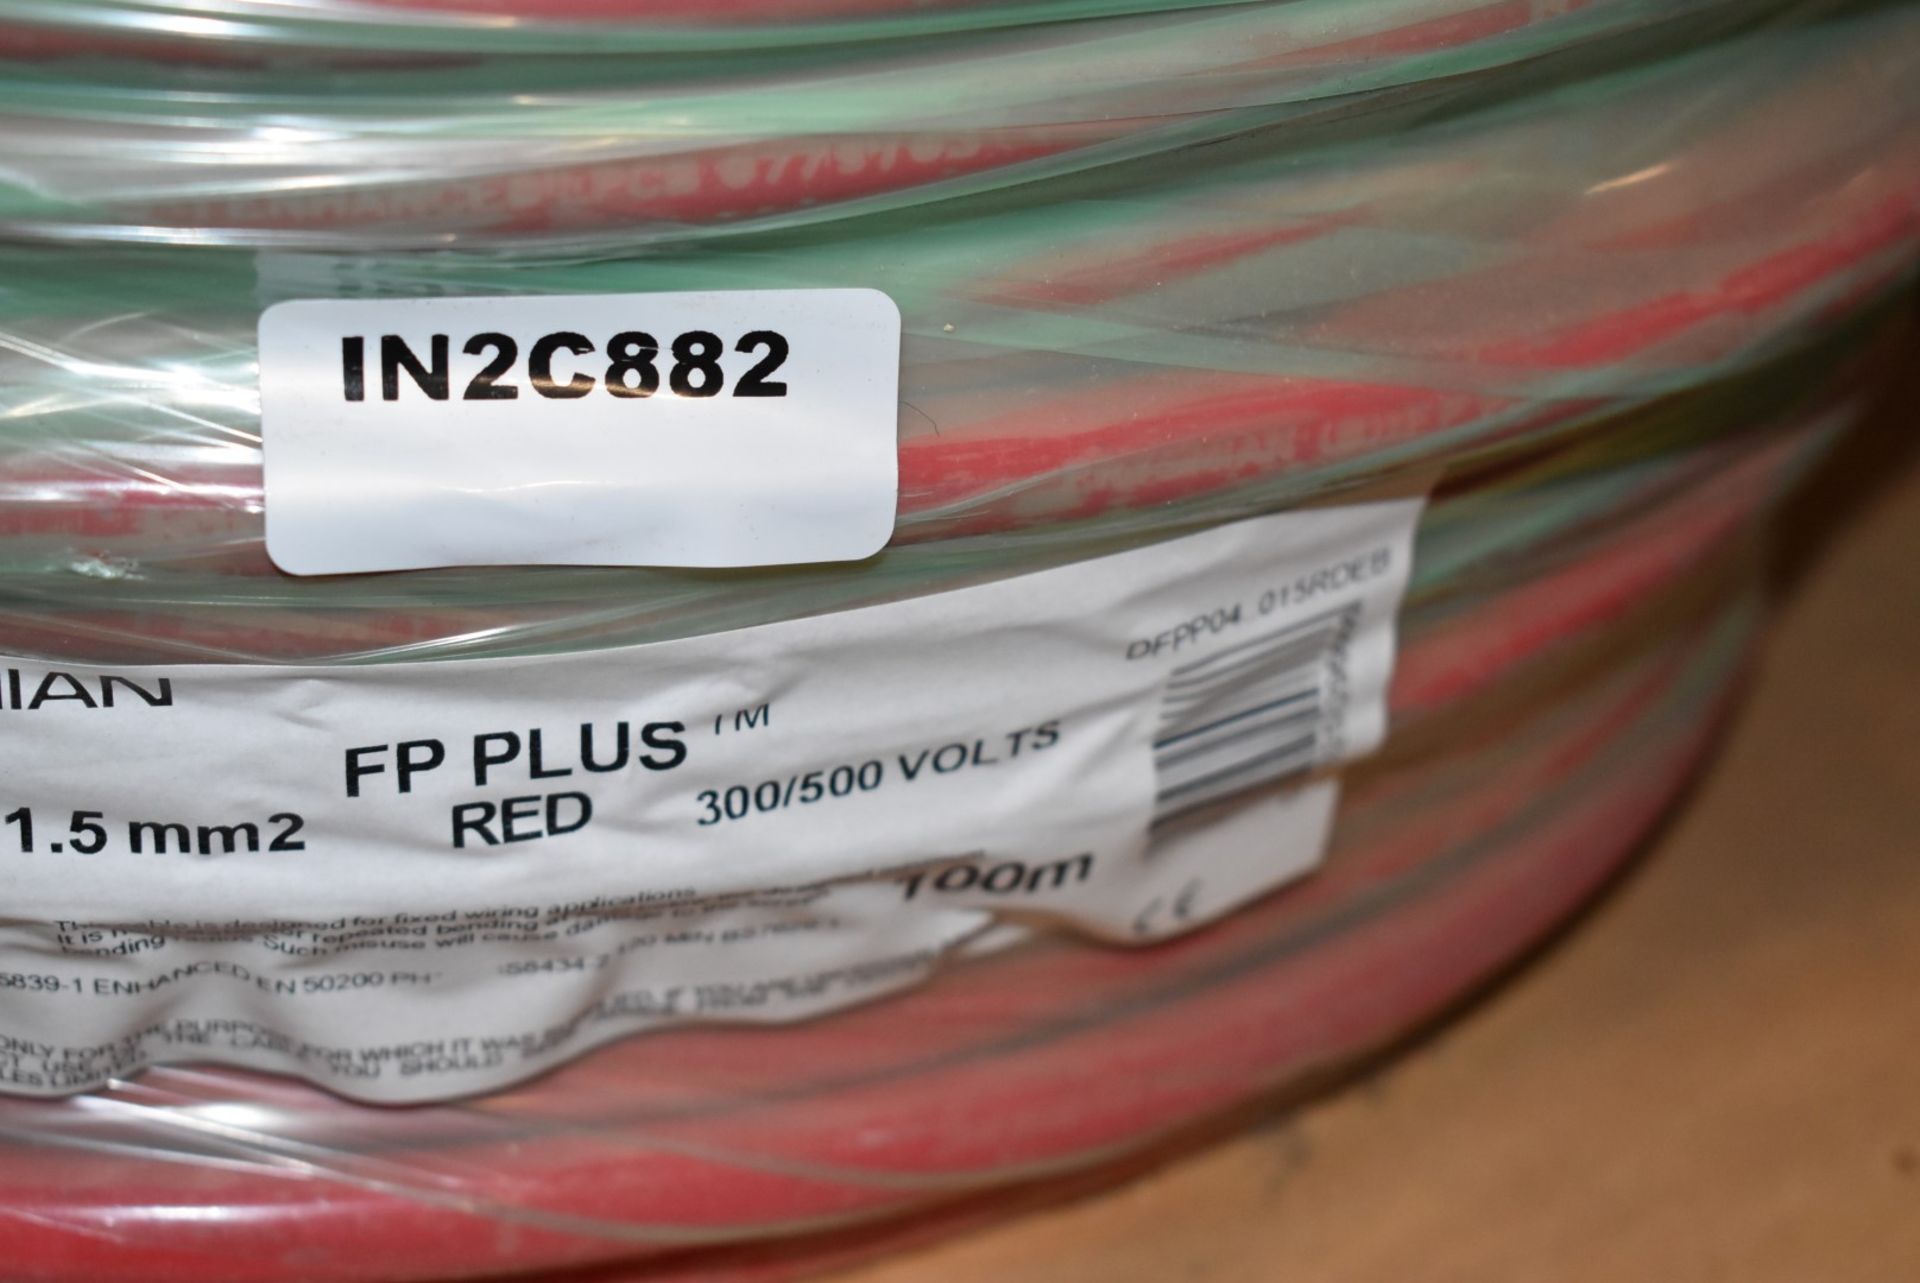 1 x Prysmian 100m FP Plus 4 Core 1.5mm2 Red Enhanced Fire Alarm Cable - 300/500v - RRP £360 - Image 4 of 5